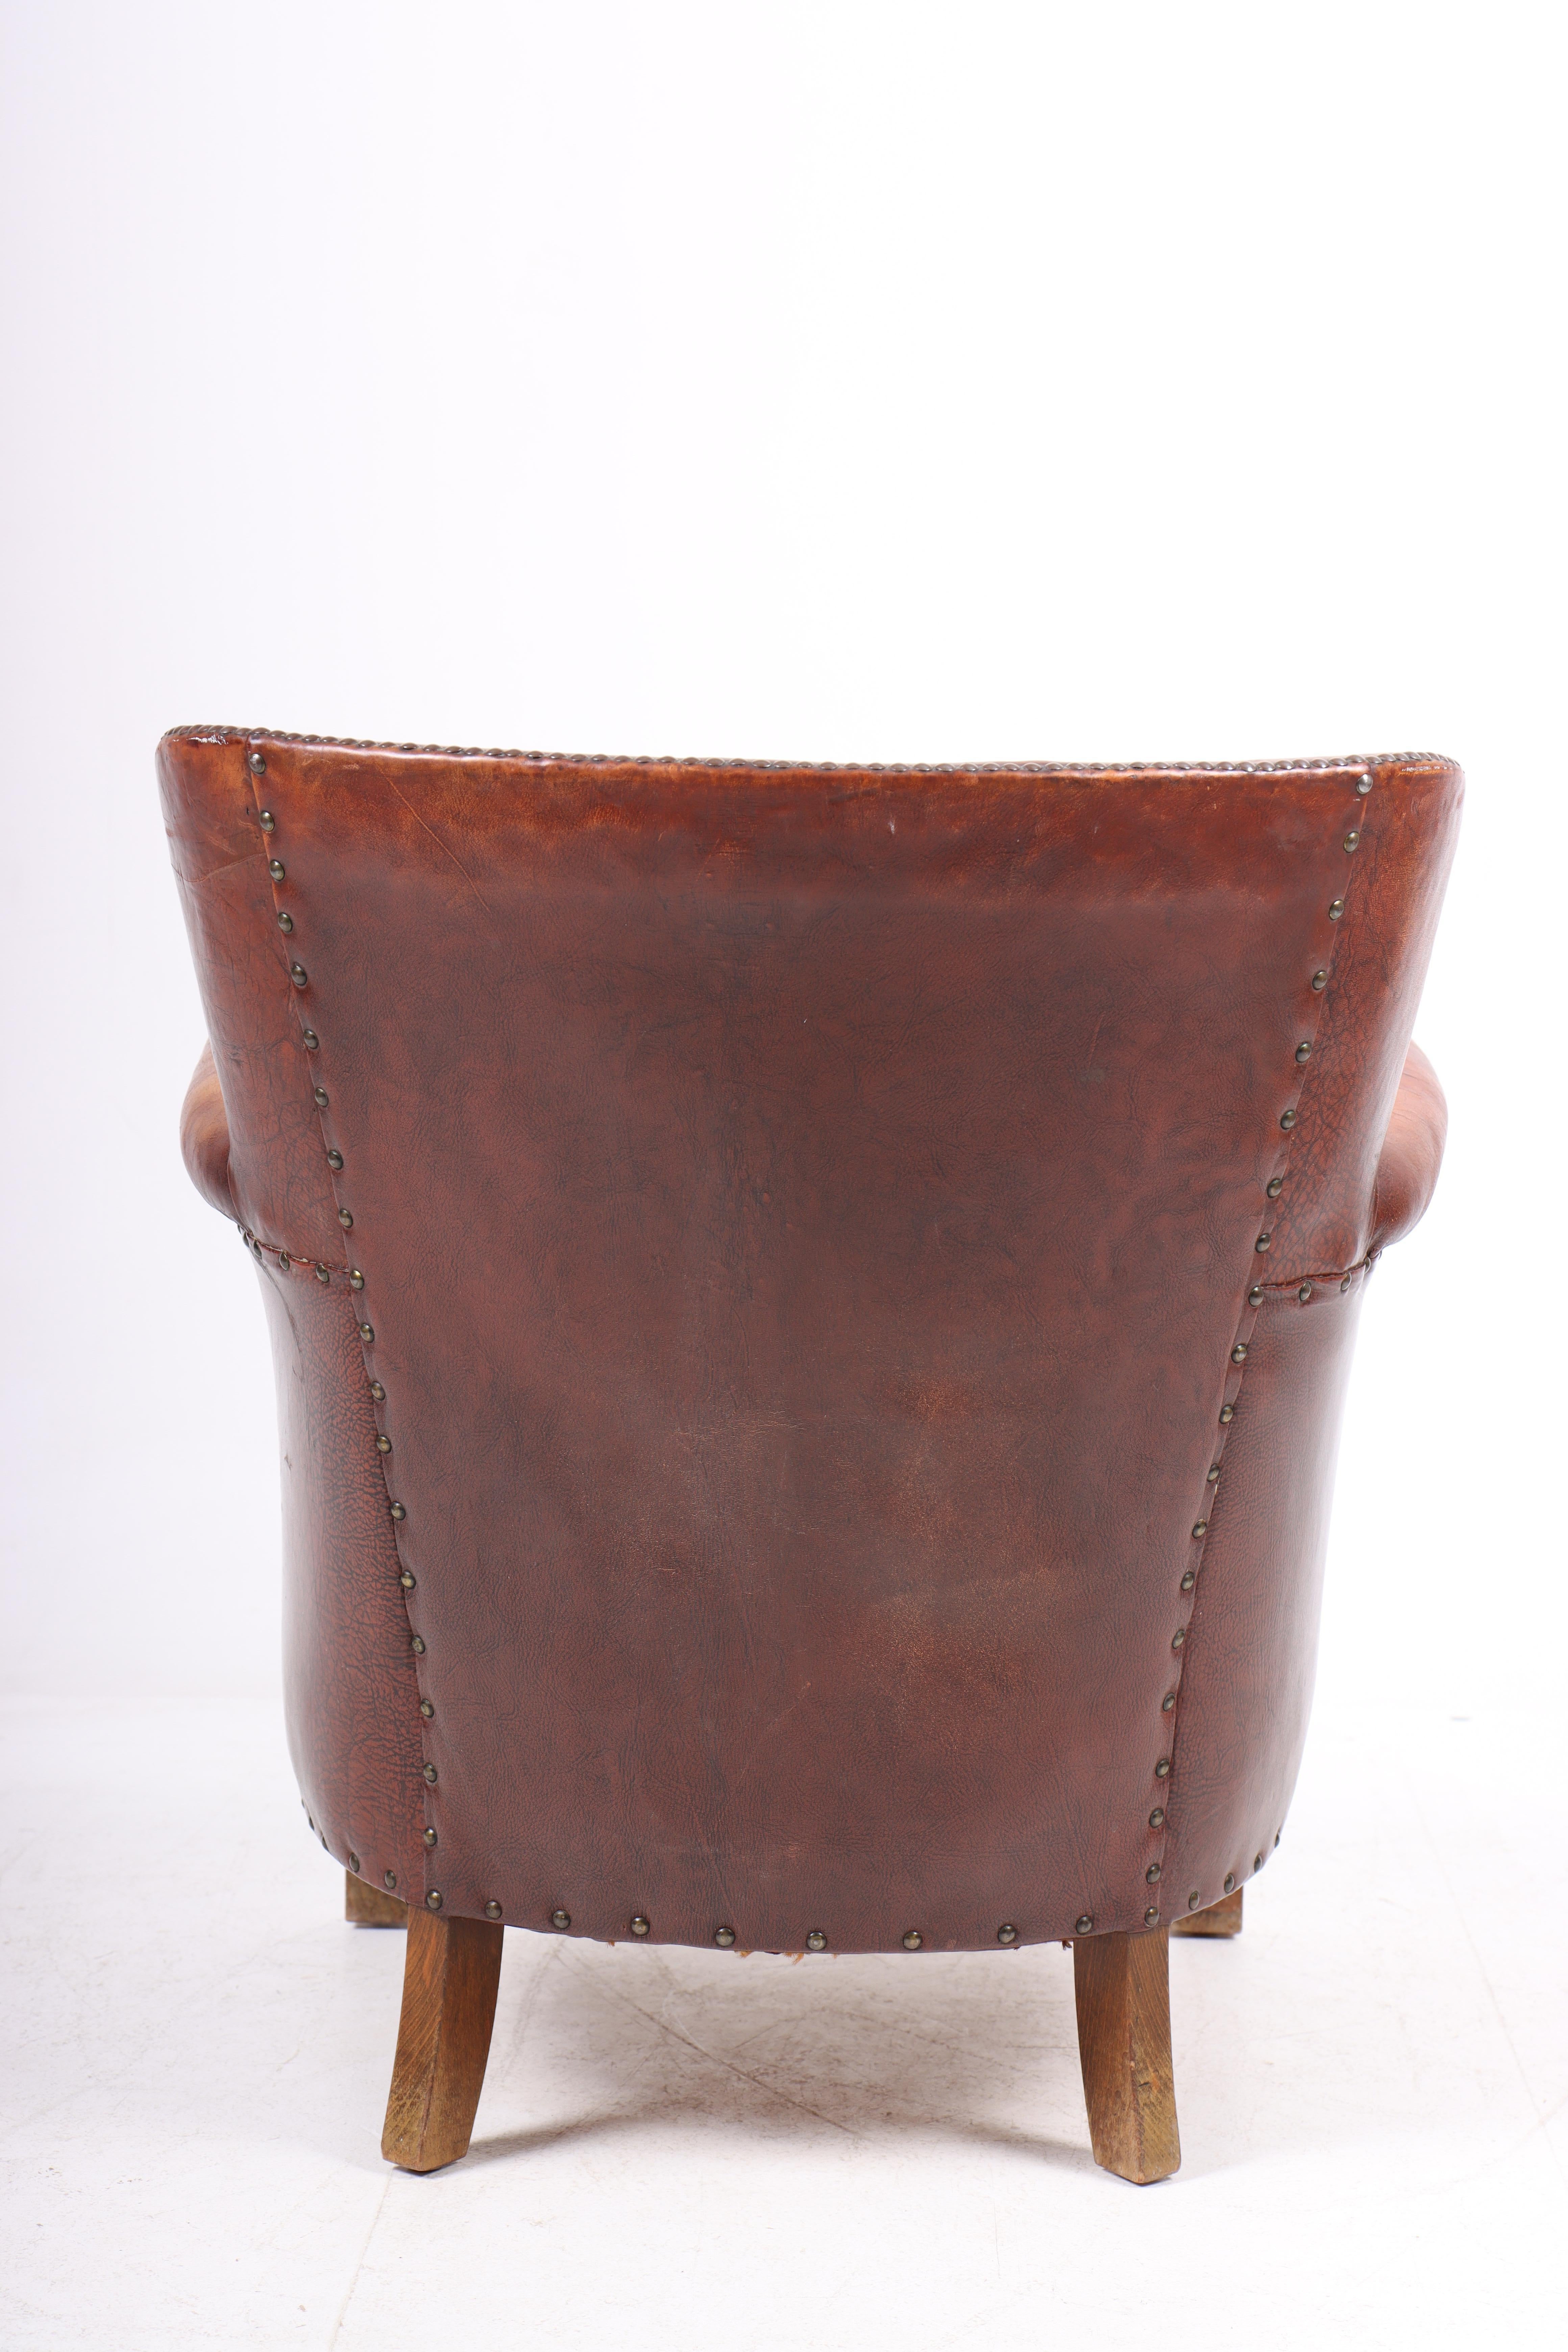 Mid-20th Century Lounge Chair in Patinated Leather, Made in Sweden 1940s